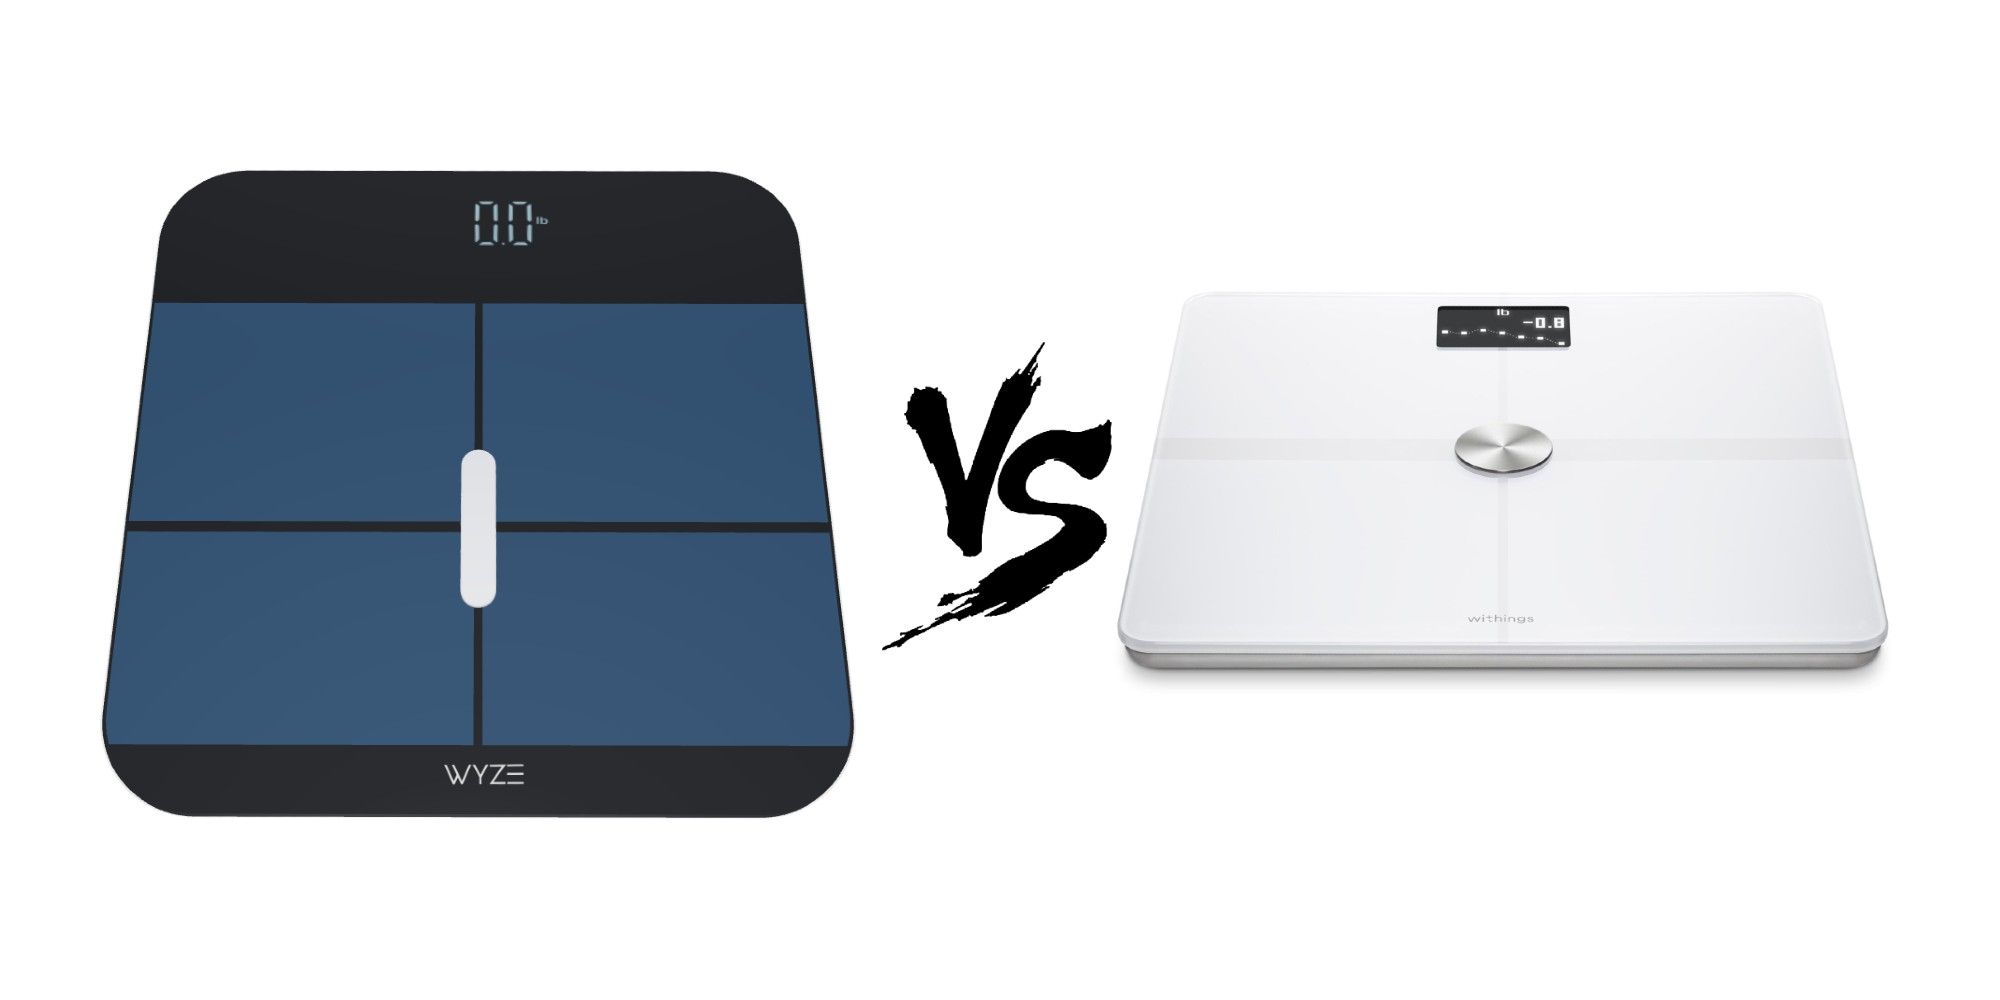 Wyze Launched Its New Smart Band & Smart Scale Today At Under $25